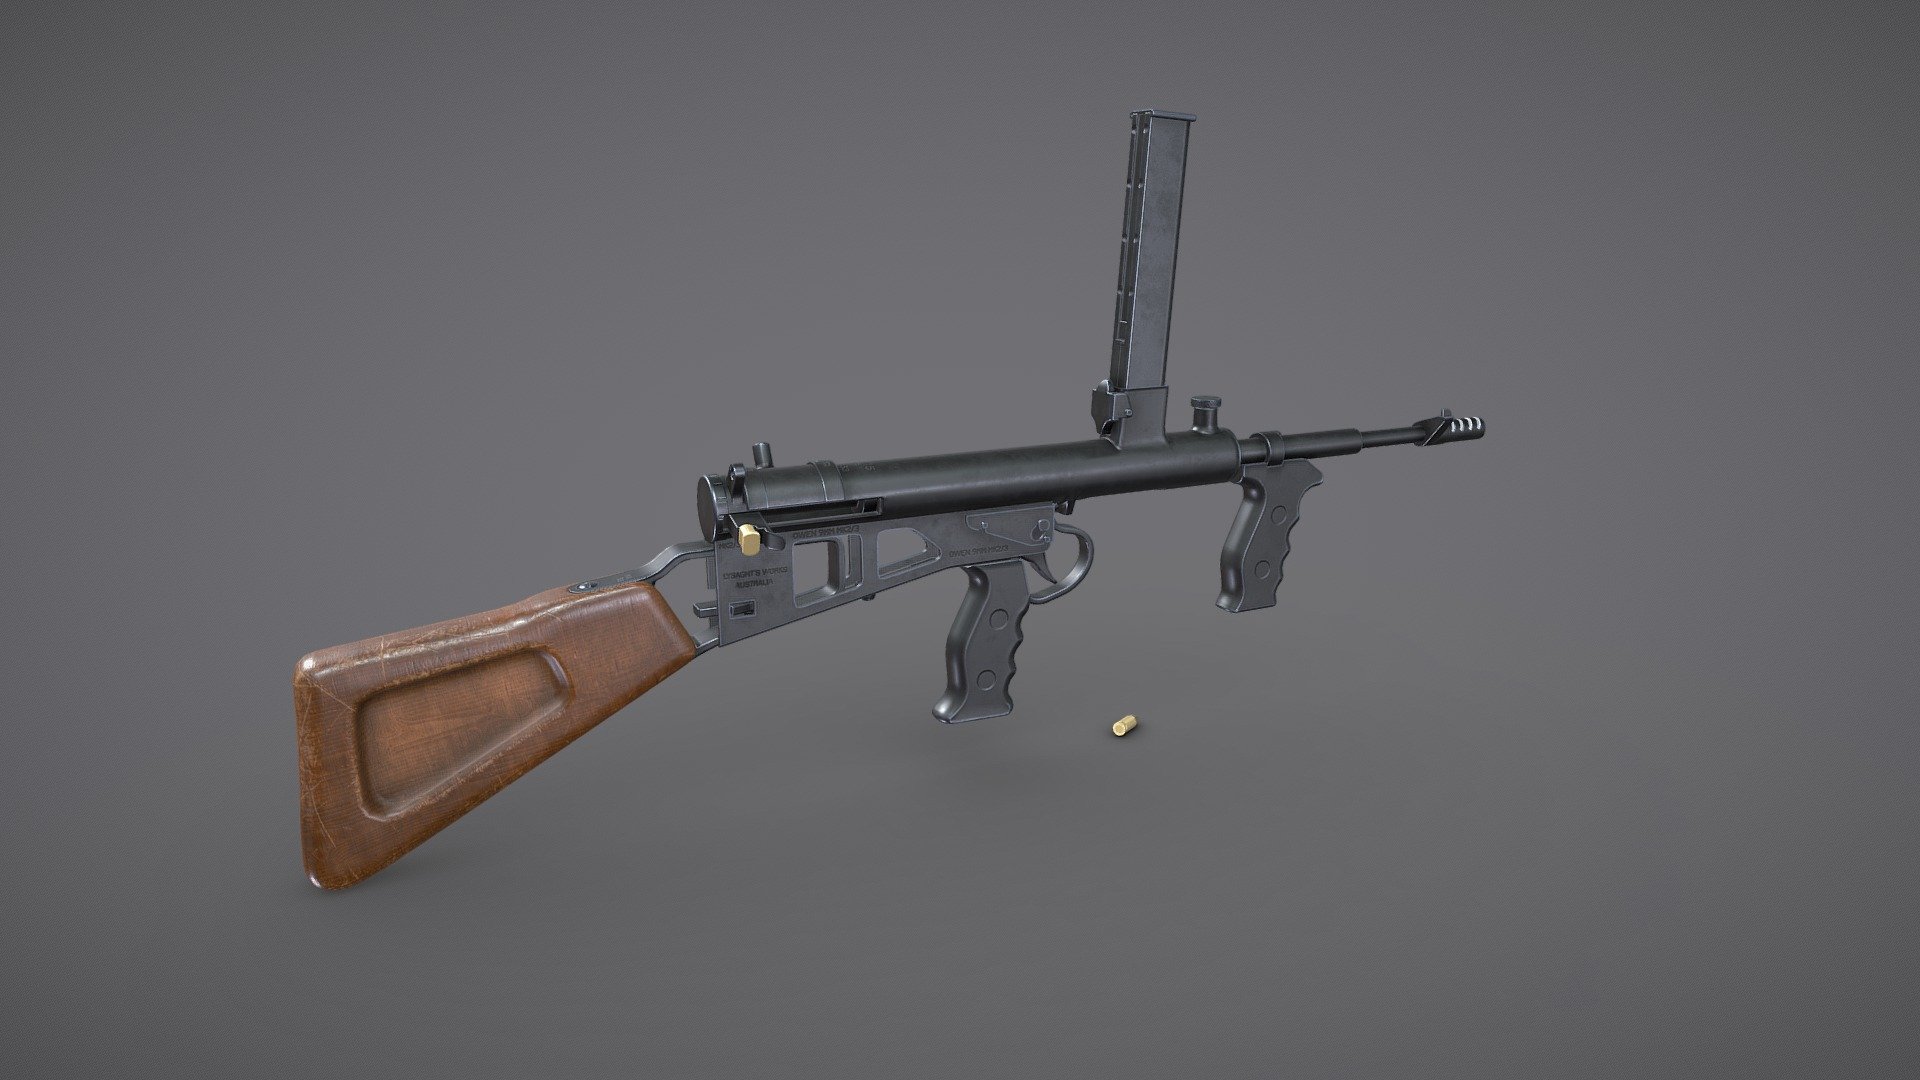 Owen Gun MK 2/3




Low-poly ready to use in AR/VR Games (17089 tris).

separate objects for animation(bolt, trigger, mag lock,mag bullet, fire select).

textures are in PNG format 4096x4096 PBR metalness 1 set.

-Detailed enough for close-up renders.

File Units: Centimeter.

Available formats: MAX 2018 and 2015, OBJ, MTL, FBX.

If you need any other file format you can always request it.

All formats include materials and textures.
 - Owen Gun MK 2/3 - Buy Royalty Free 3D model by MaX3Dd 3d model